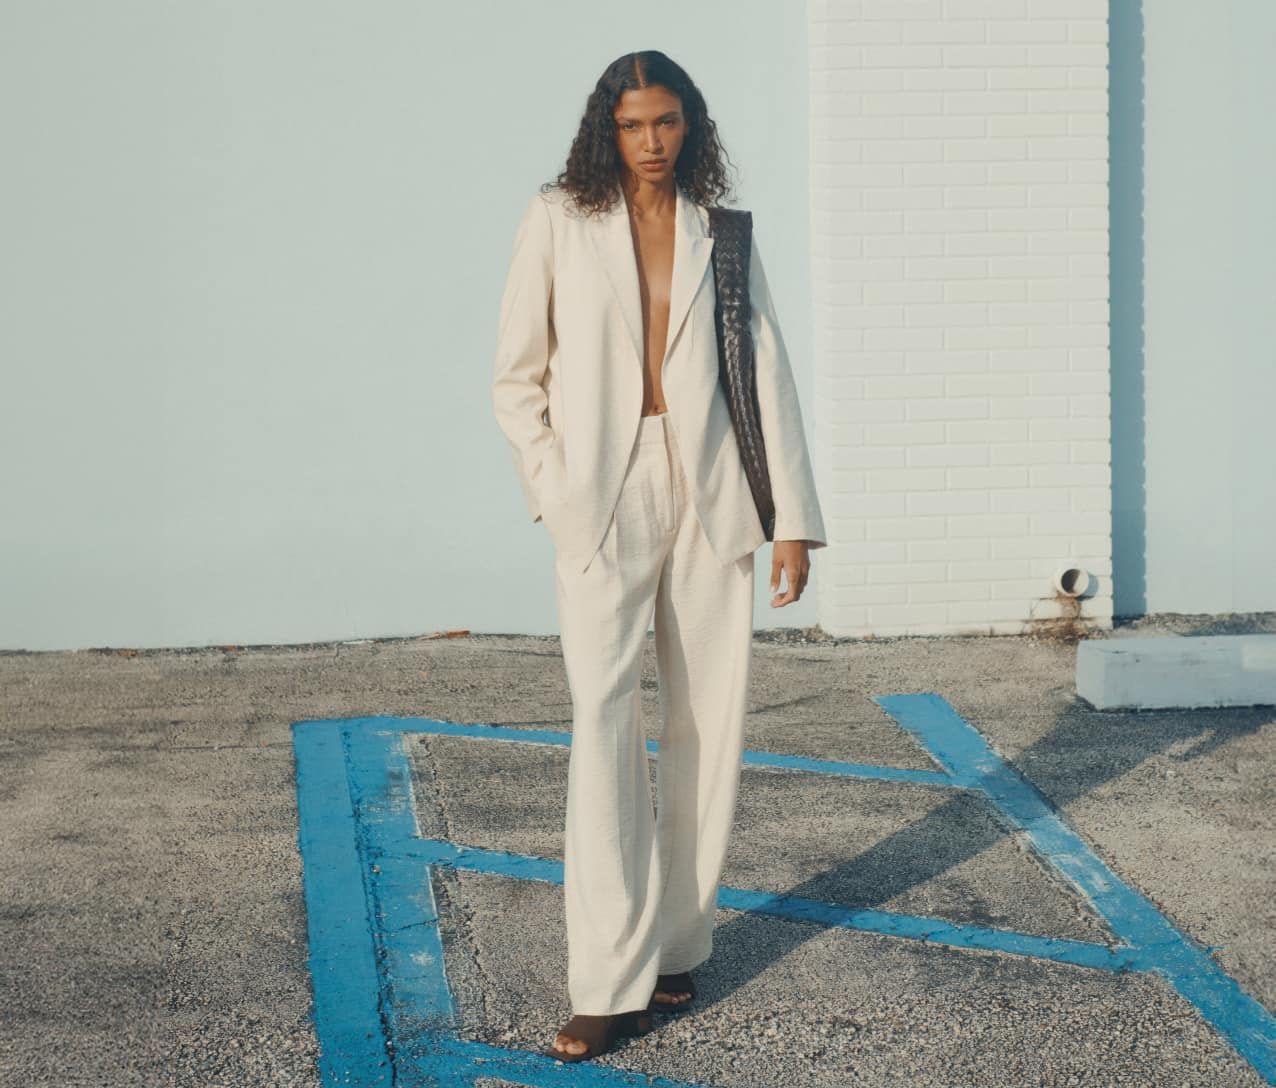 Model is wearing a matching white relaxed-fit suit.